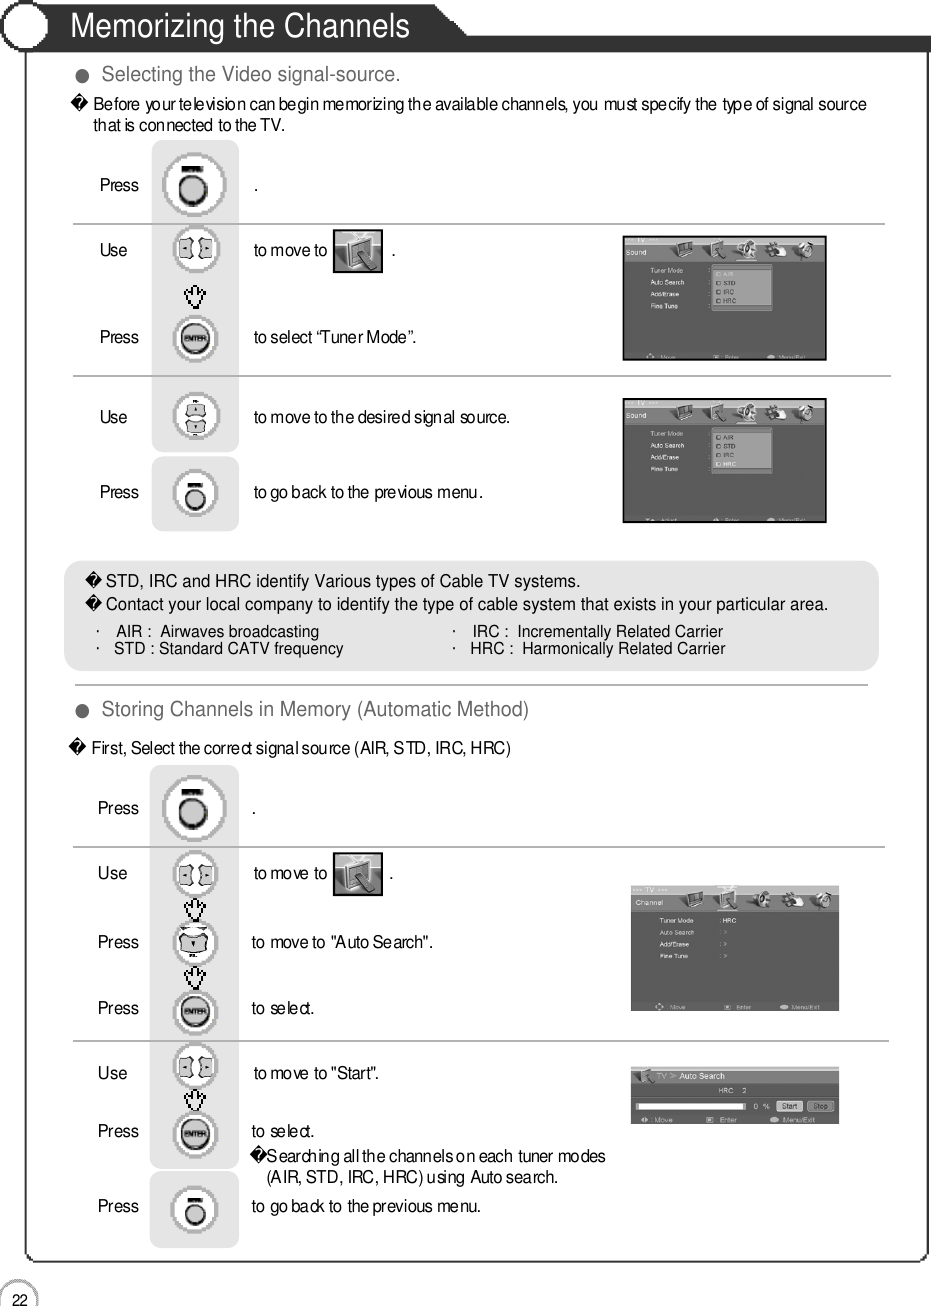 Memorizing the Channels2 2Basic UseBefore your television can begin memorizing the available channels, you must specify the type of signal source that is connected to the TV.First, Select the correct signal source (AIR, STD, IRC, HRC)Use                              to move to               .                  Press                           to move to &quot;Auto Search&quot;.    Press                           to select.                 Press                           .Use                              to move to &quot;Start&quot;.Press                           to select.Searching all the channels on each tuner modes (AIR, STD, IRC, HRC) using Auto search.Press                           to go back to the previous menu.                    Use                              to move to               .                  Press                           to select “Tuner Mode”.             Press                           .Use                              to move to the desired signal source.Press                           to go back to the previous menu.                    ●Selecting the Video signal-source.●Storing Channels in Memory (Automatic Method)・AIR :  Airwaves broadcasting                              ・IRC :  Incrementally Related Carrier・STD : Standard CATV frequency                       ・HRC :  Harmonically Related CarrierSTD, IRC and HRC identify Various types of Cable TV systems.Contact your local company to identify the type of cable system that exists in your particular area.